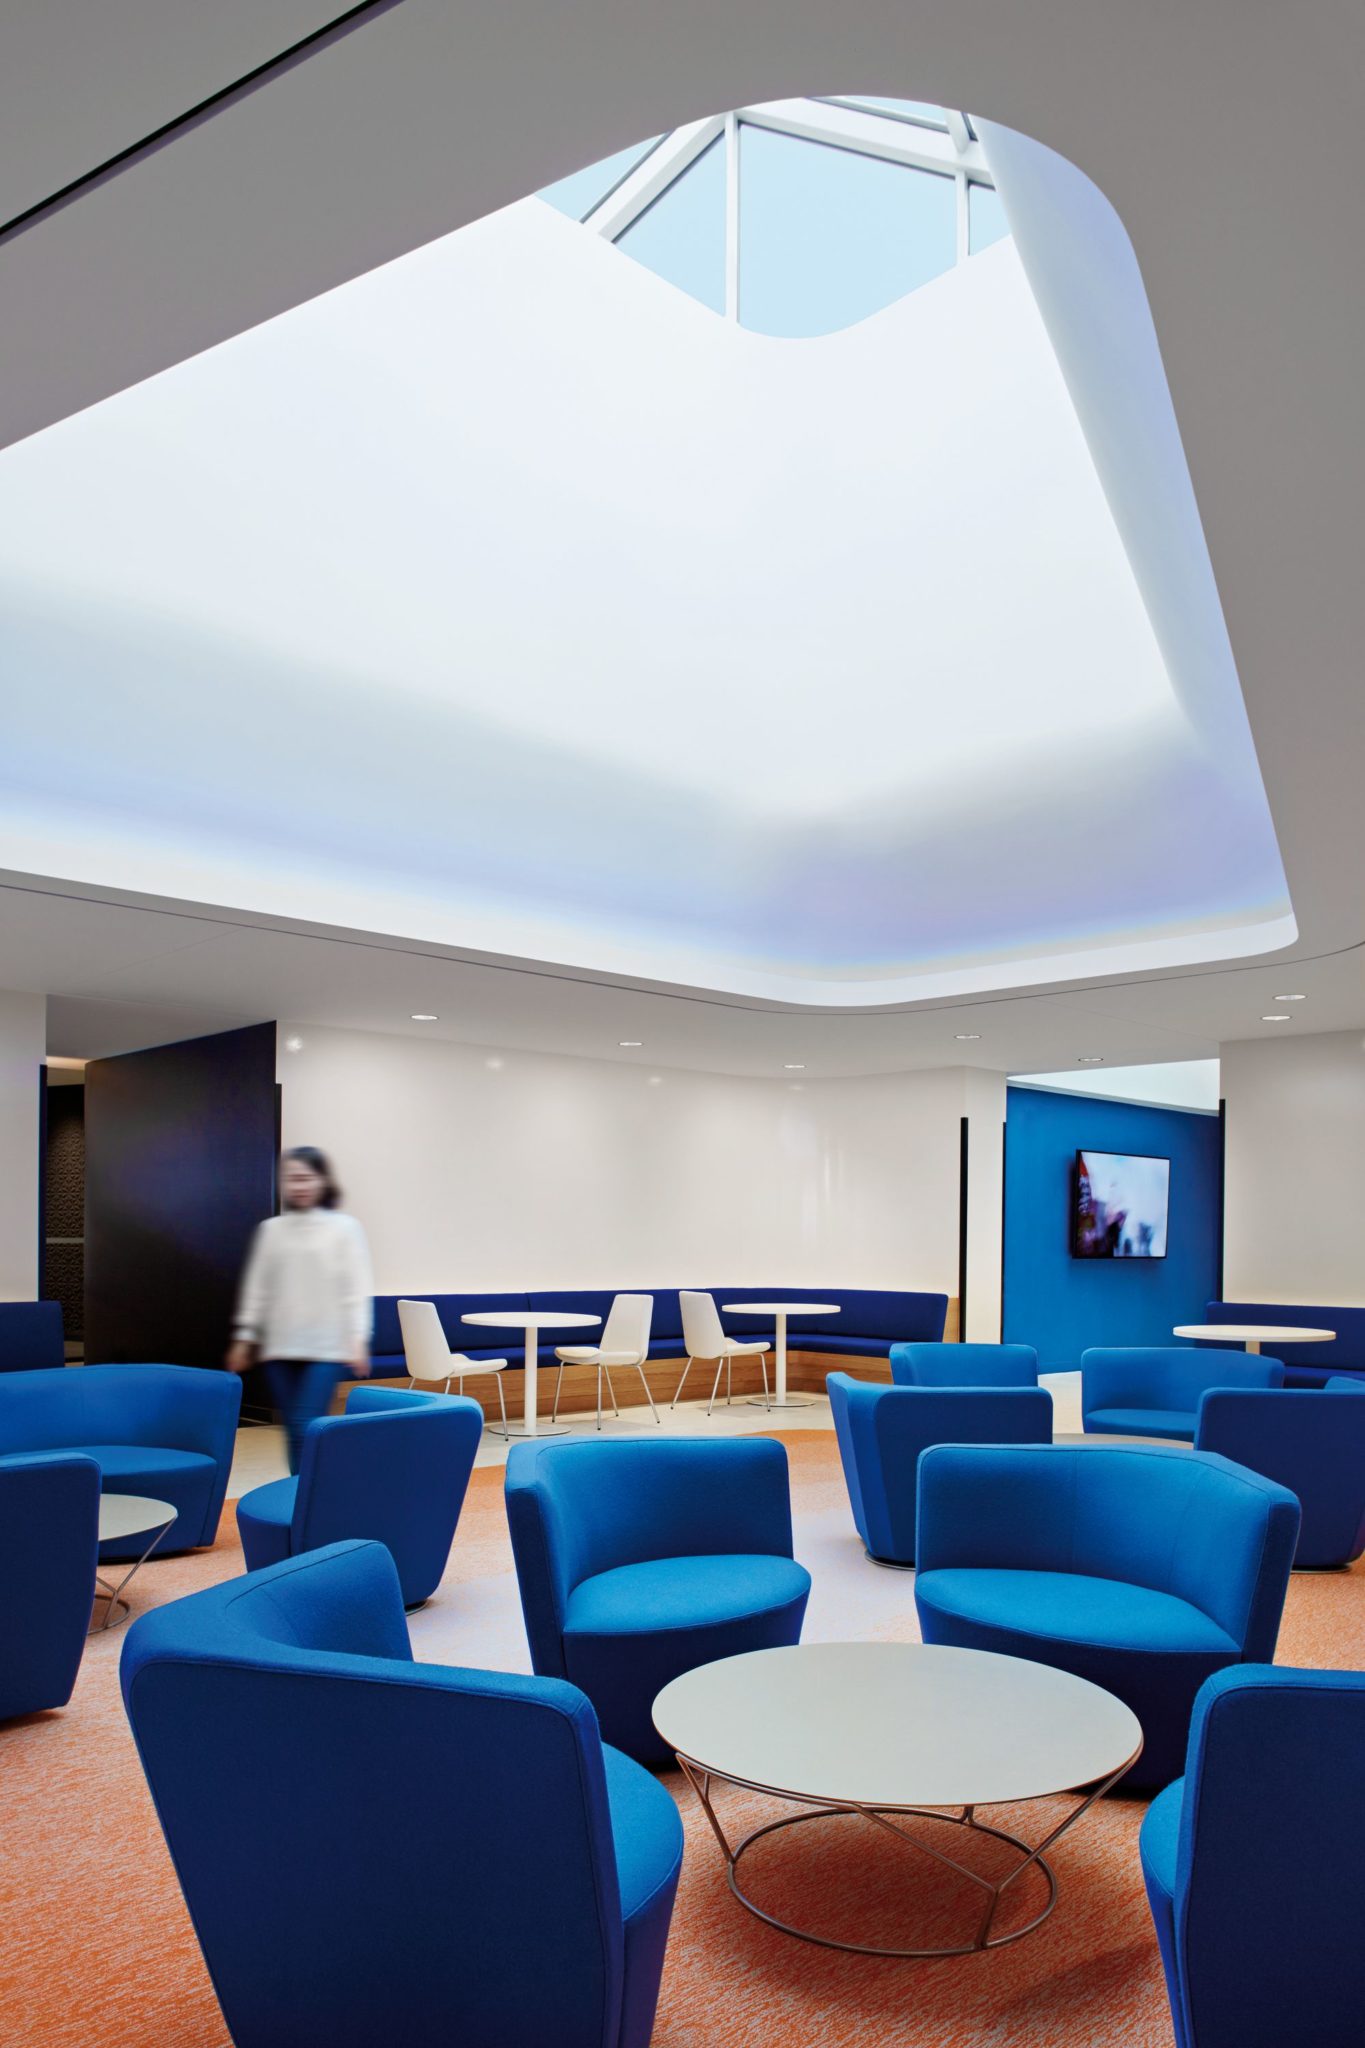 Ceiling-and-skylight-bring-natural-light-into-the-lunch-room